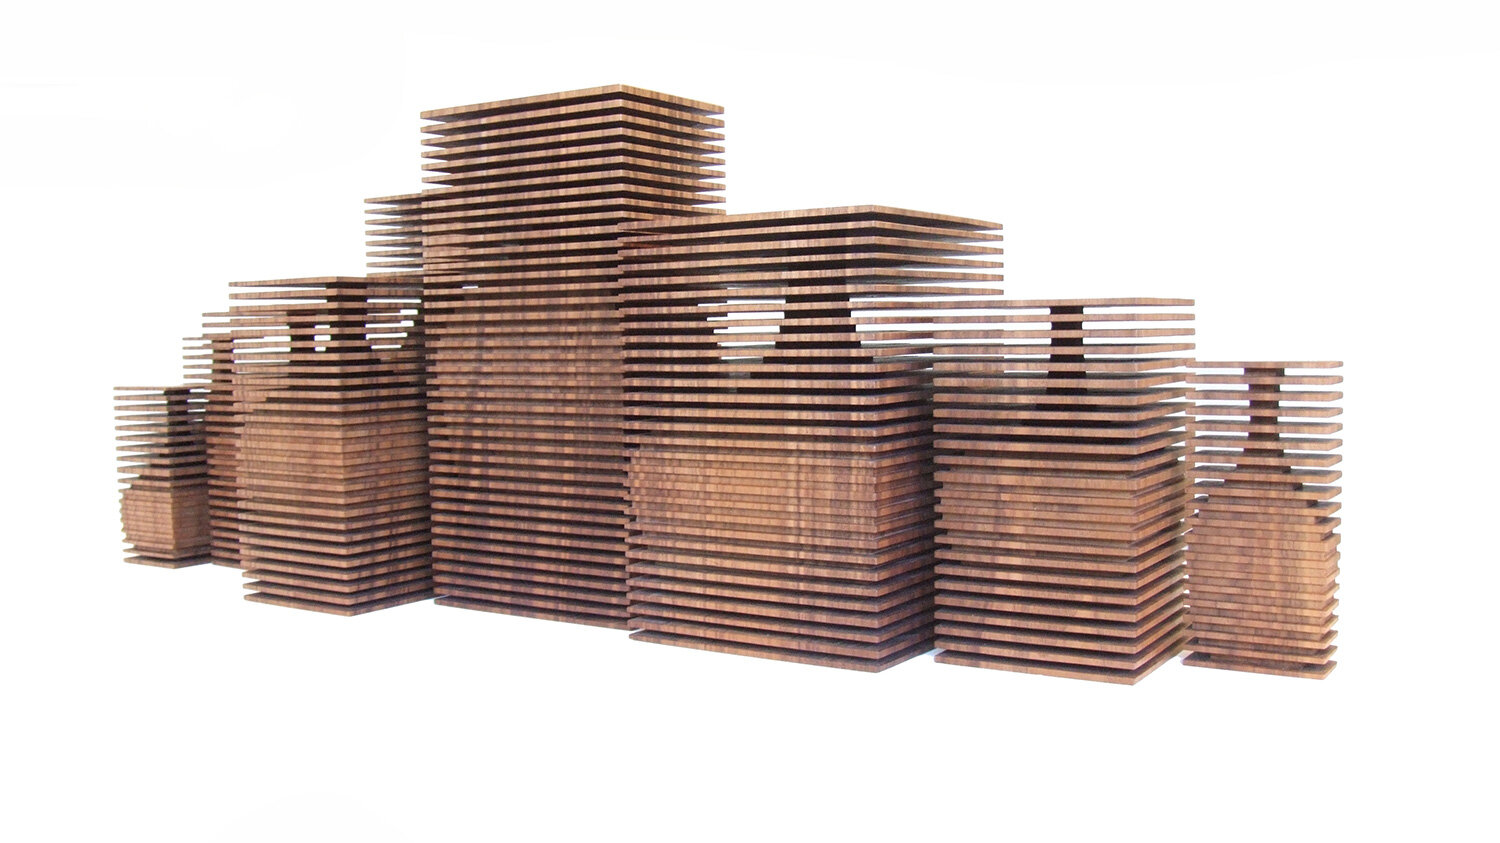 group of digital fabricated wooden objects